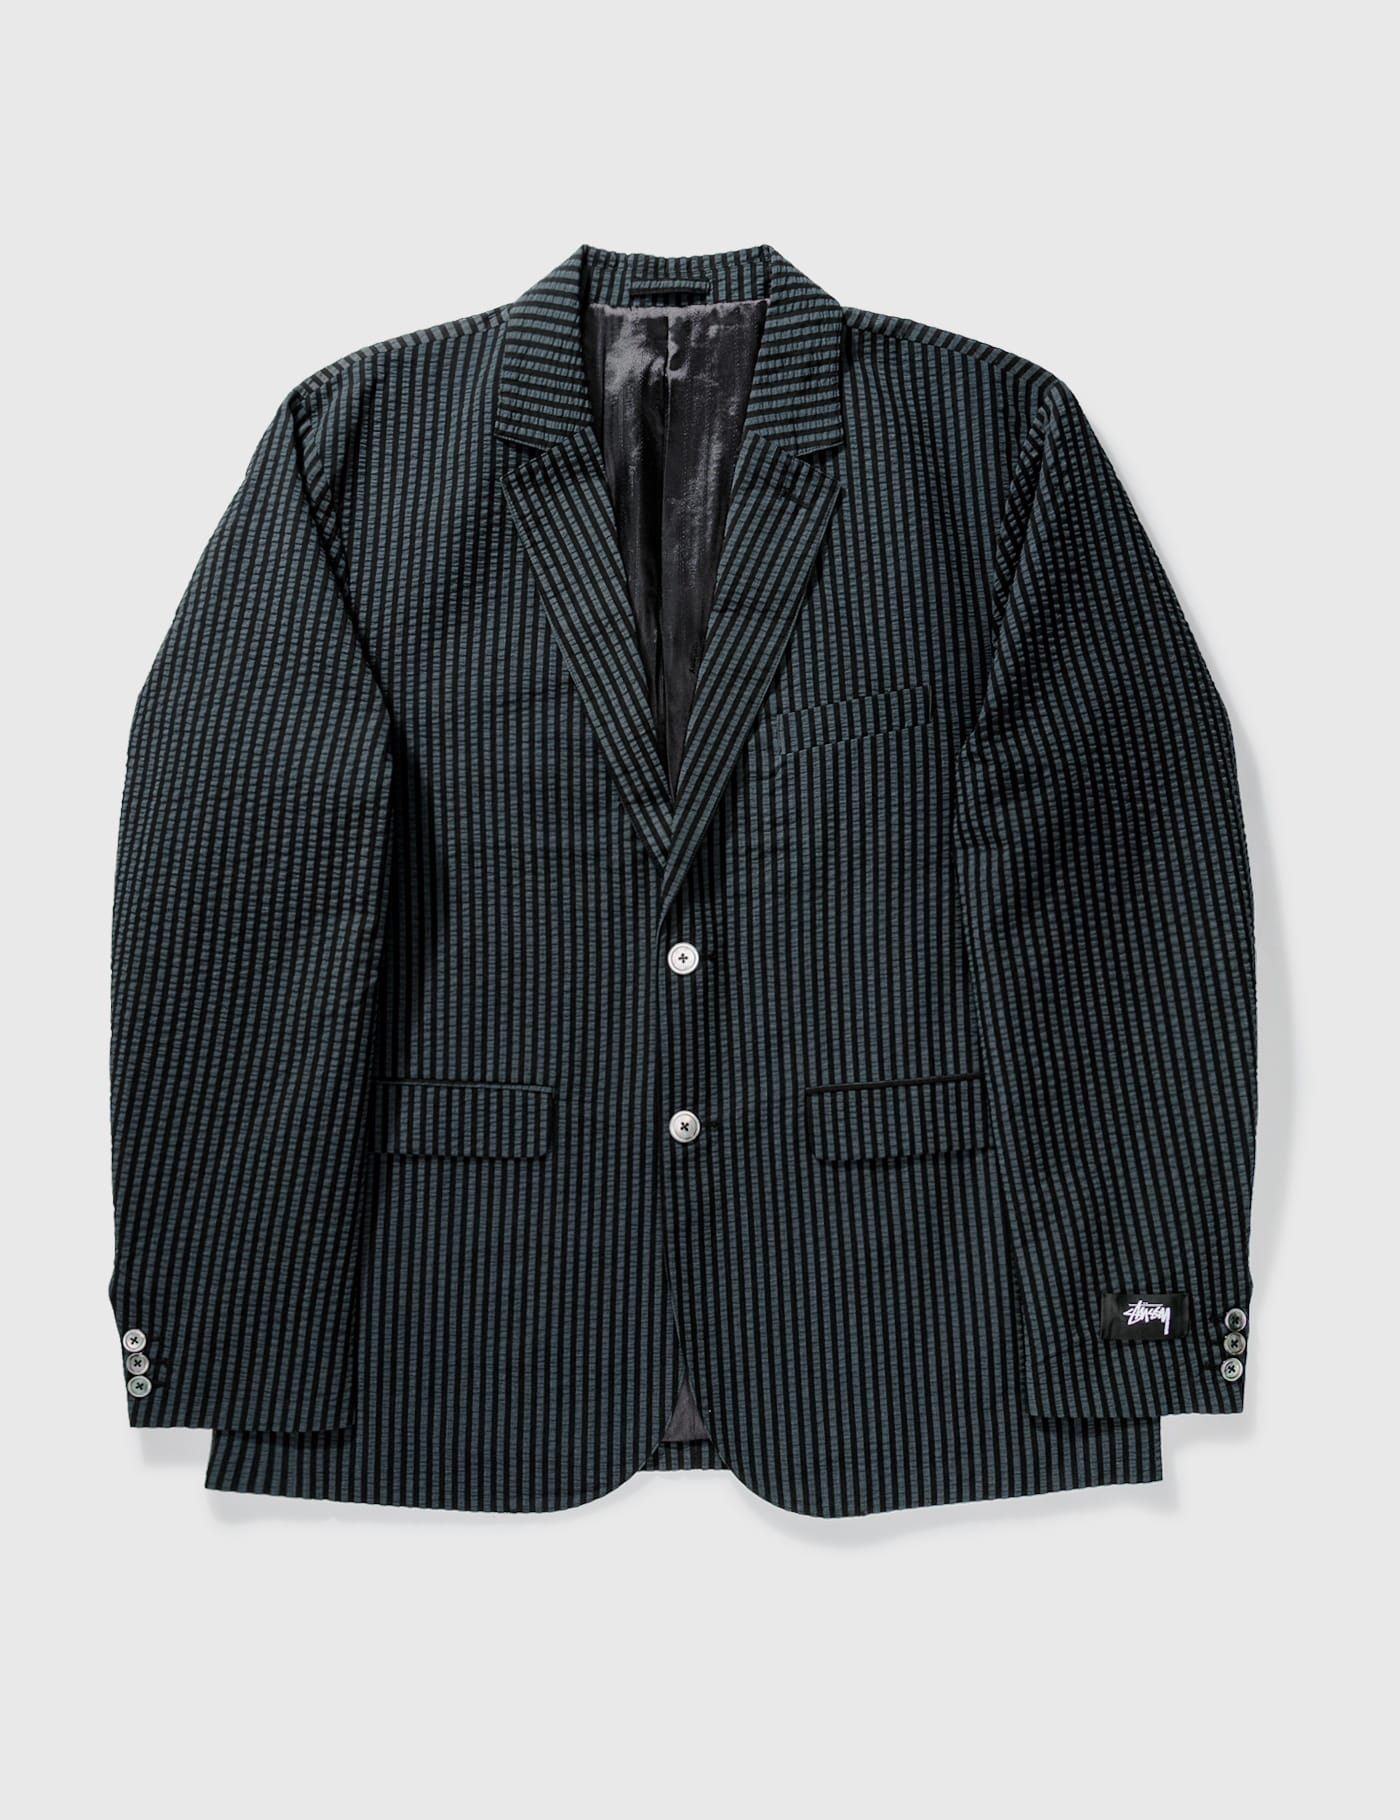 Stüssy - Stripe Seersucker Sport Coat | HBX - Globally Curated Fashion and  Lifestyle by Hypebeast